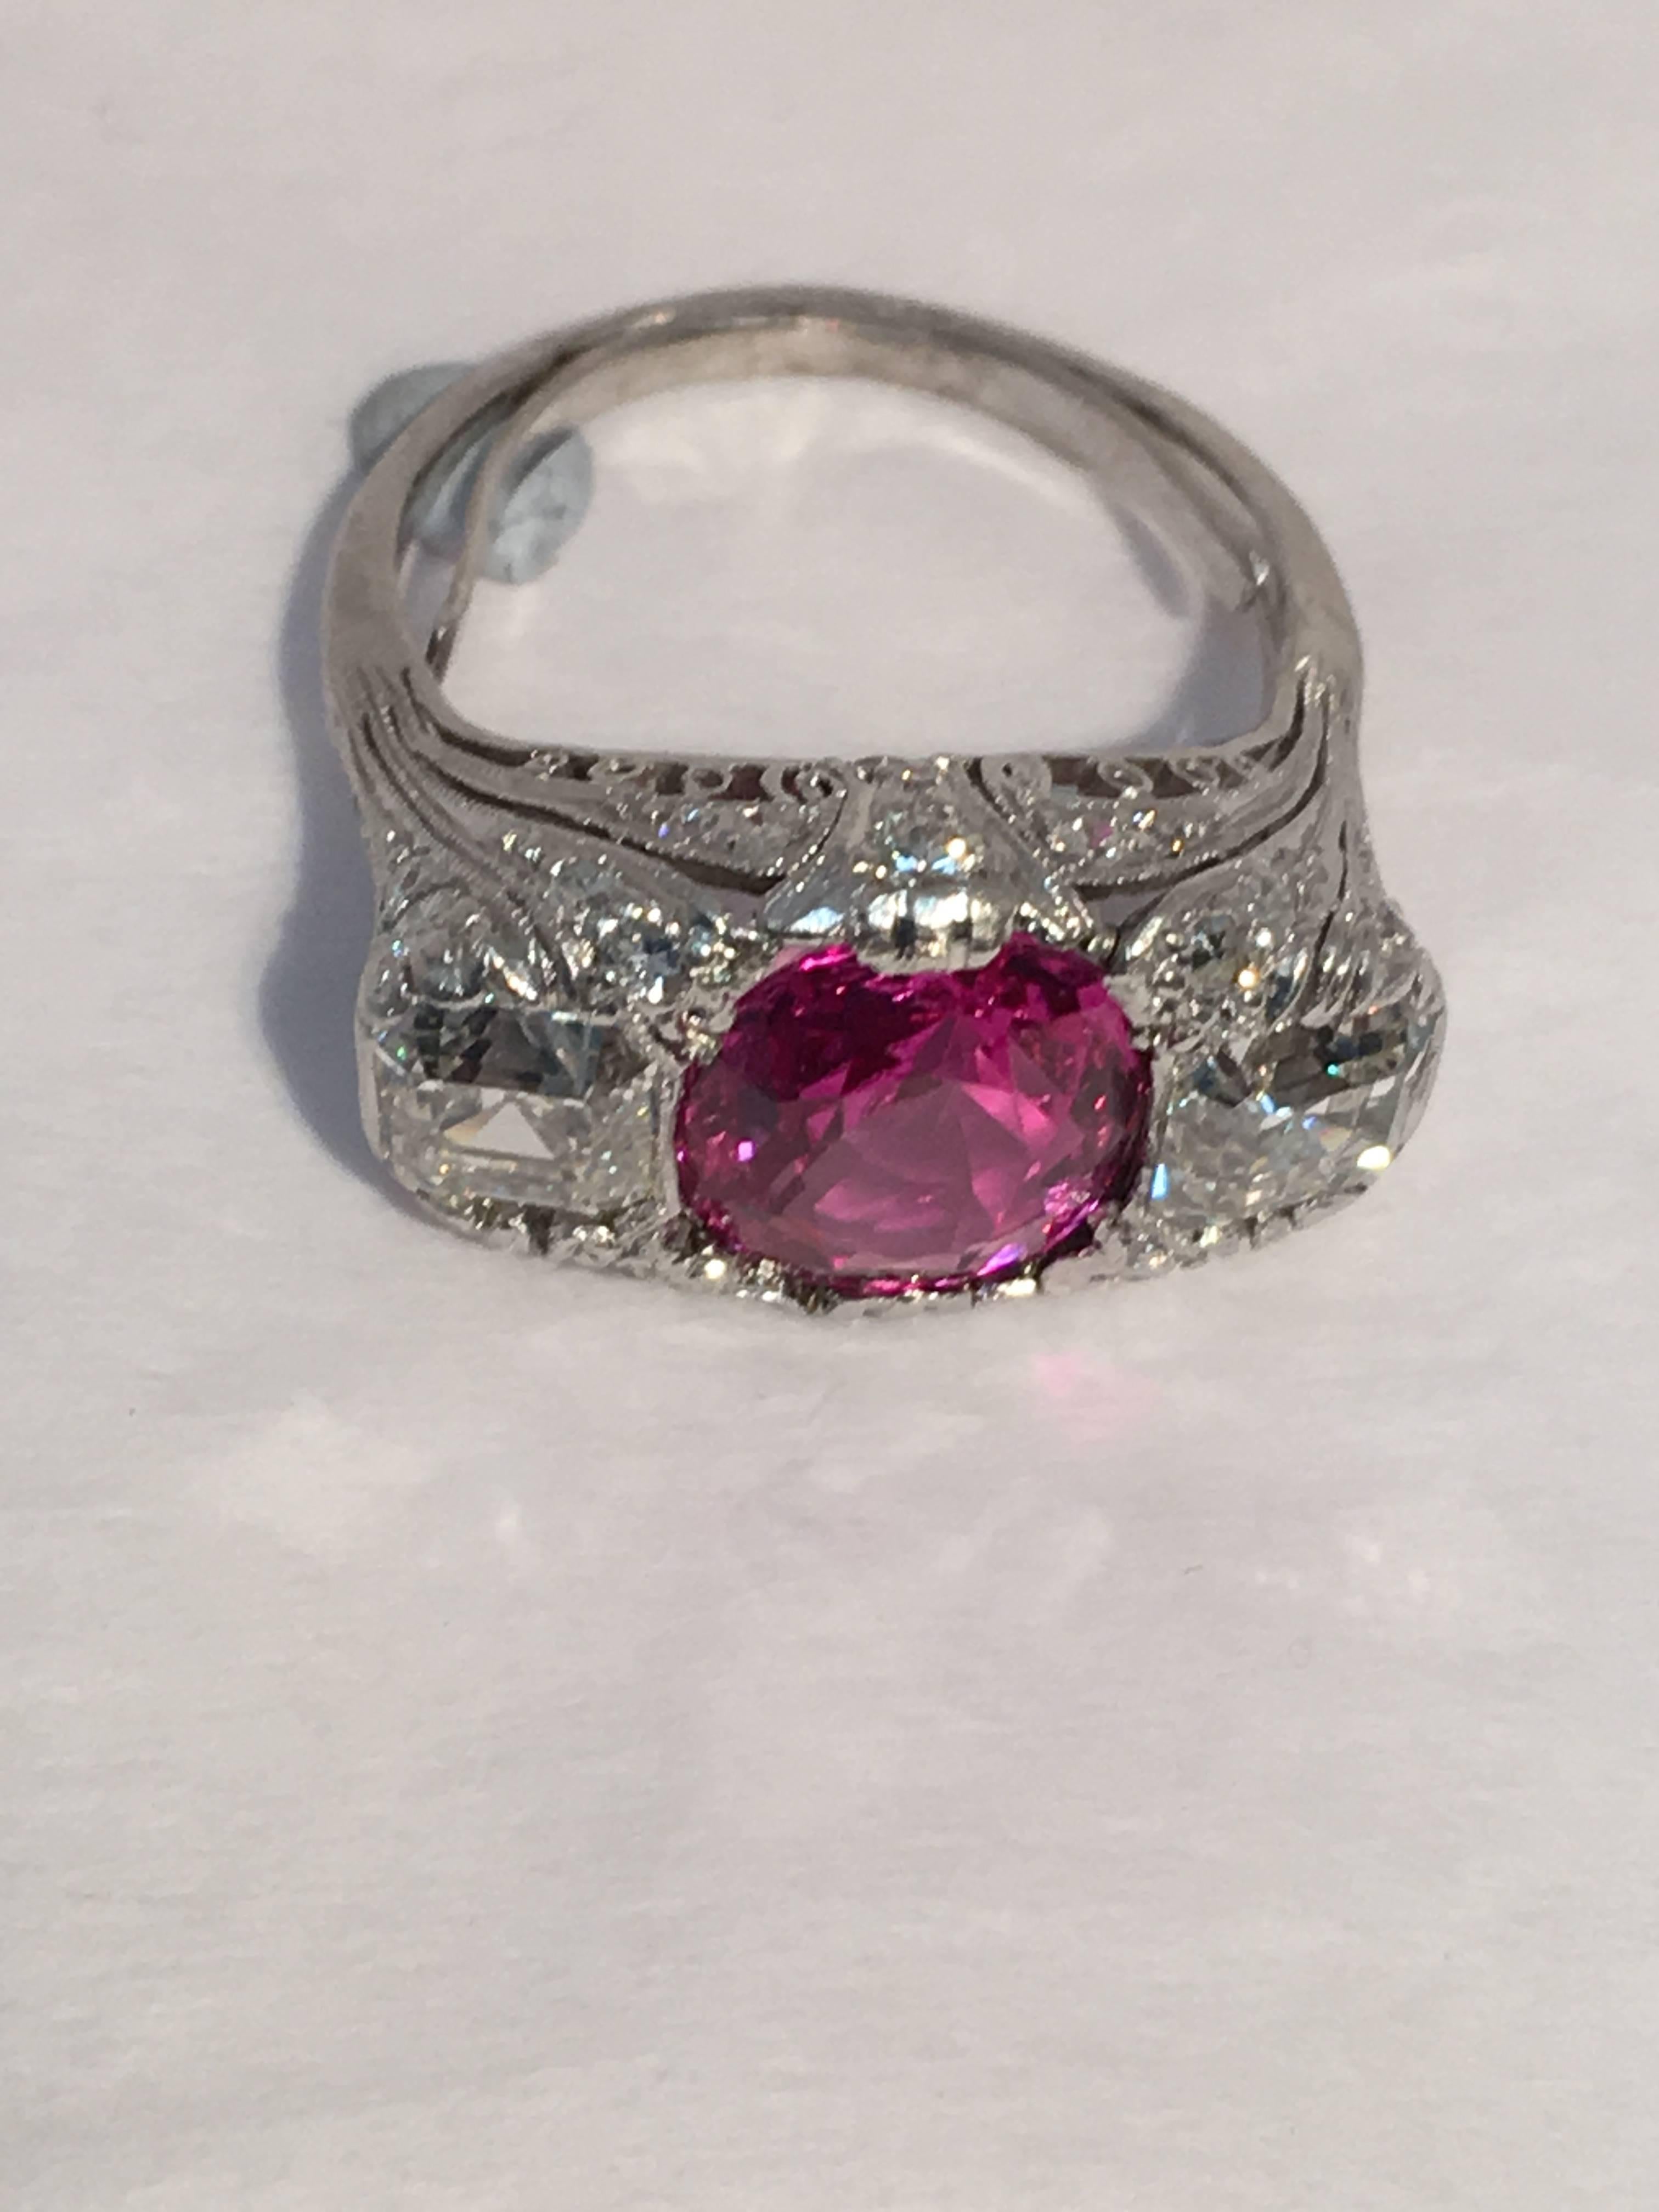 This highly detailed platinum Art Deco ring is center set with one cushion shape natural pink sapphire (GIA Sapphire Report #2121011169) weighing 3.32 carats, Type II, eye clean.  Sapphire is flanked by two Asscher cut diamonds weighing .77 cts.